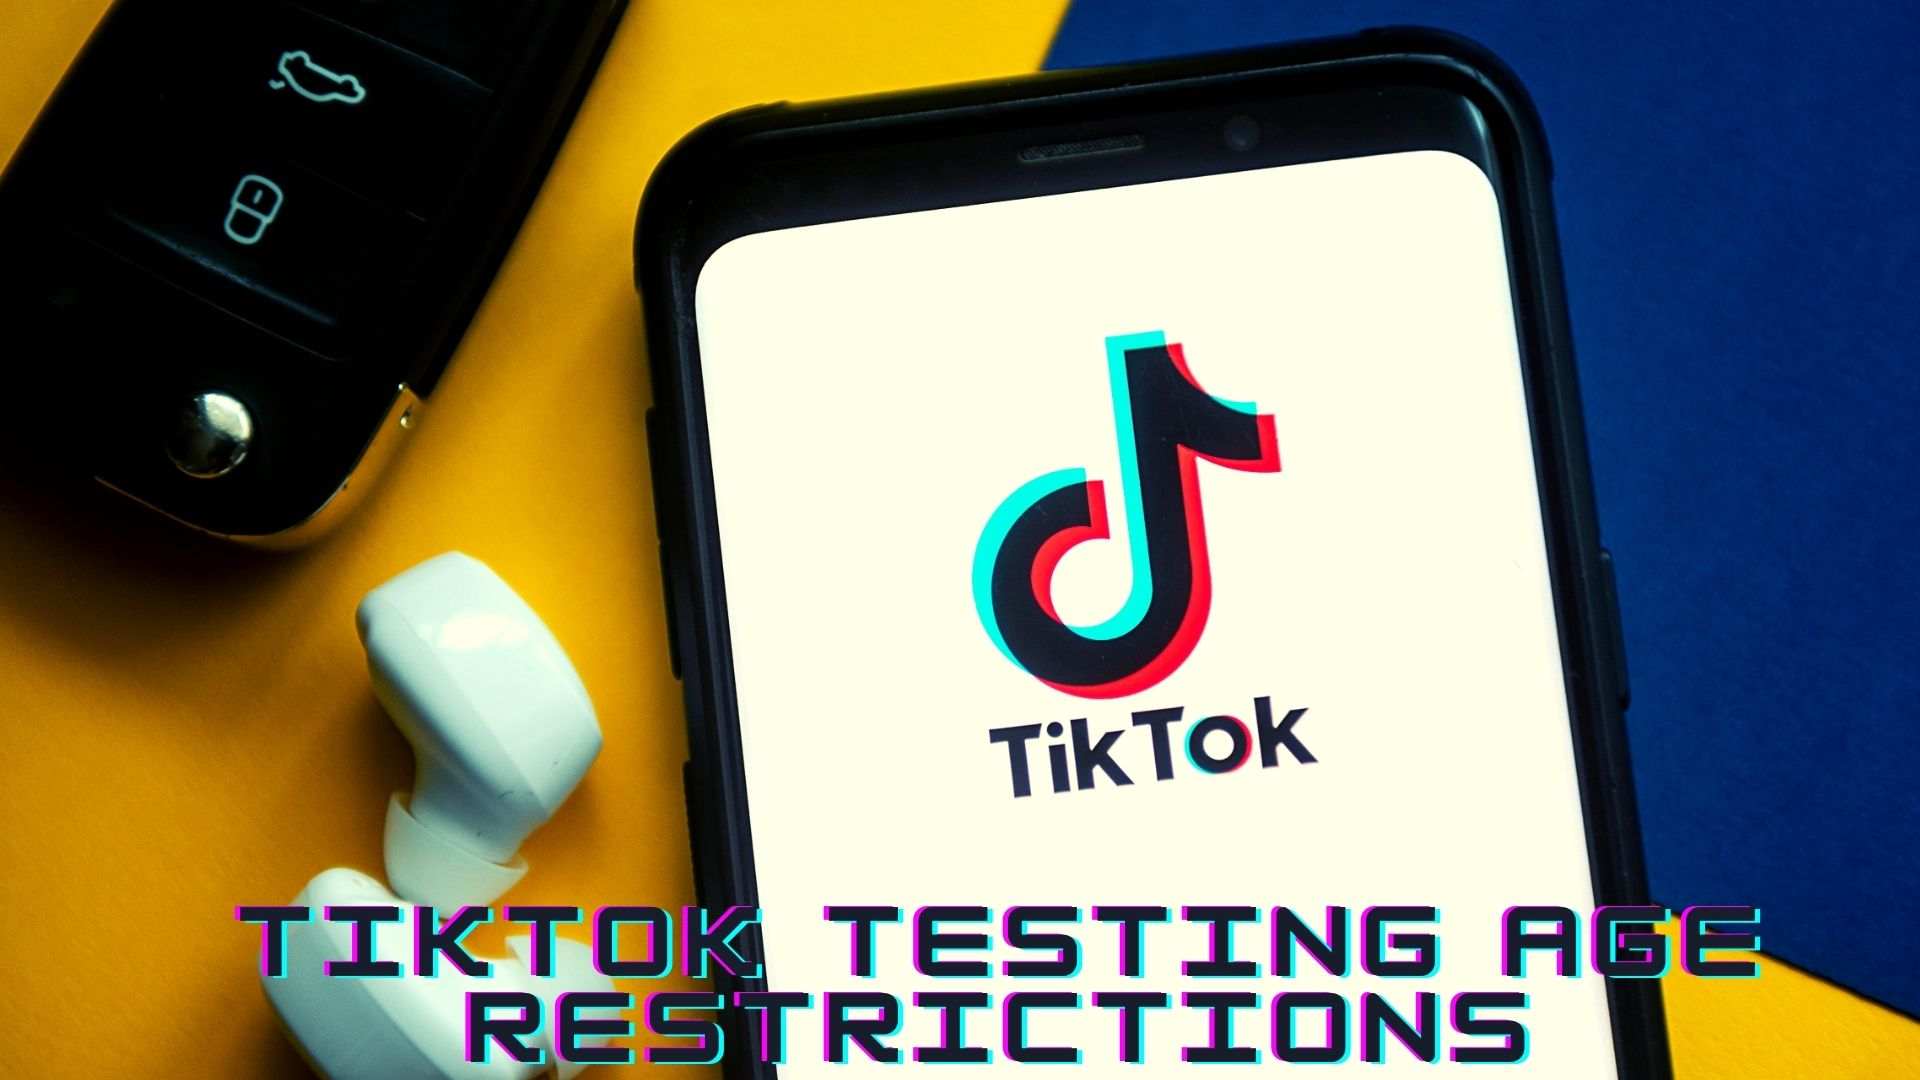 TikTok started testing Age-Rated Content Restrictions again